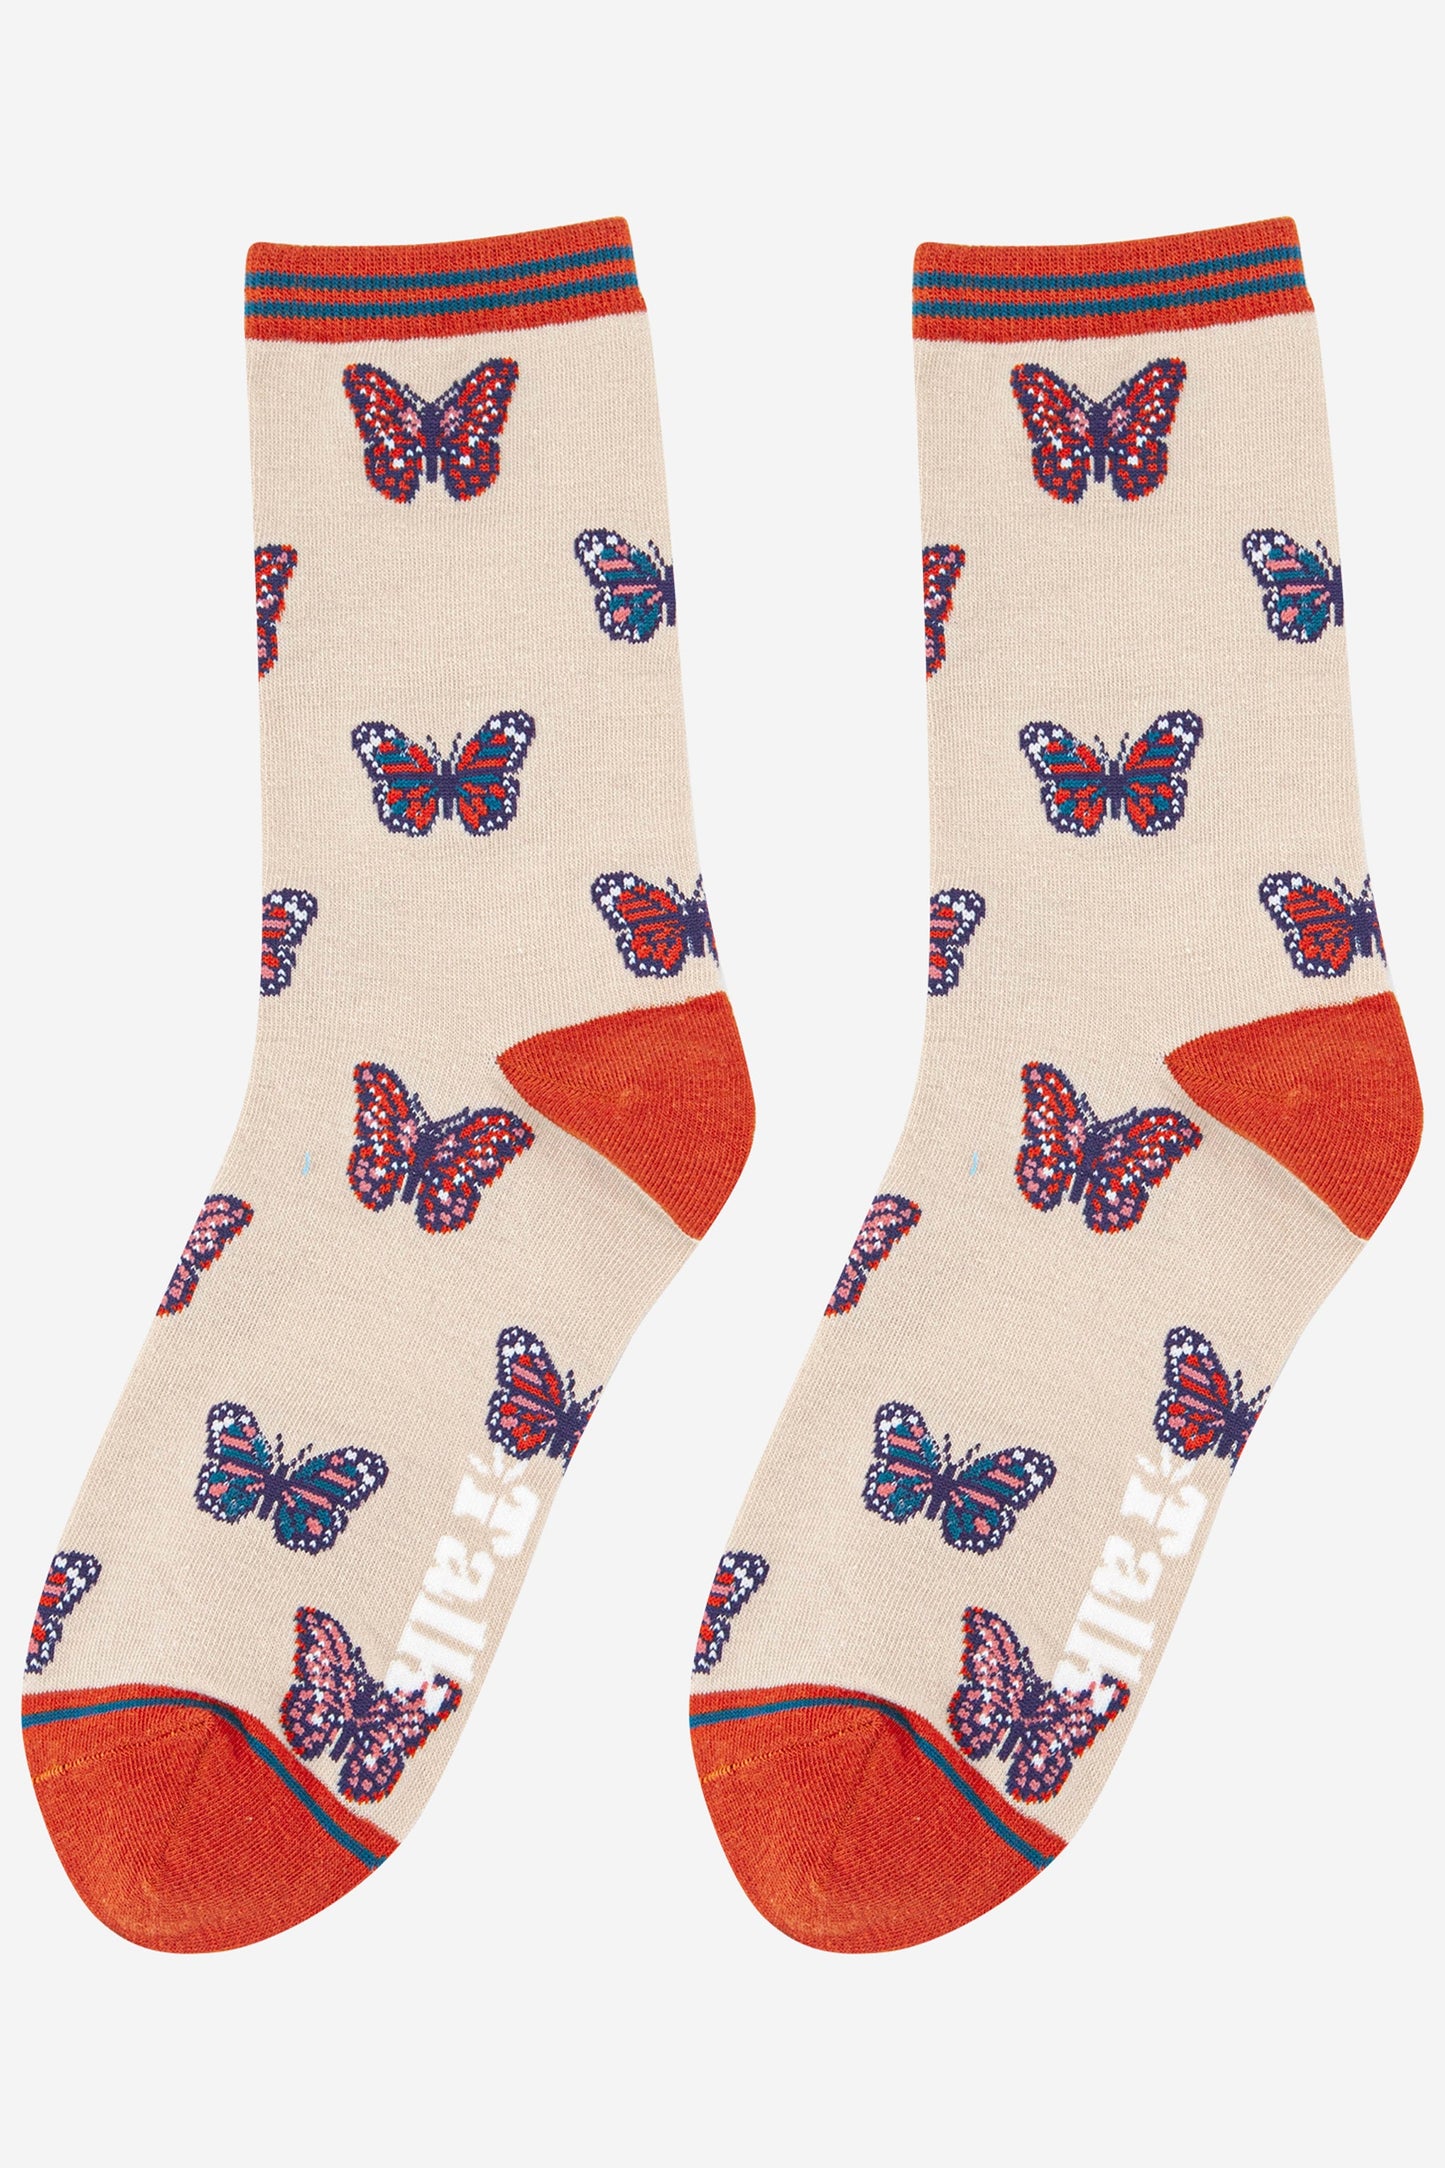 womens cream coloured ankle socks with burnt orange heel, toe and cuff with an all over butterfly print pattern